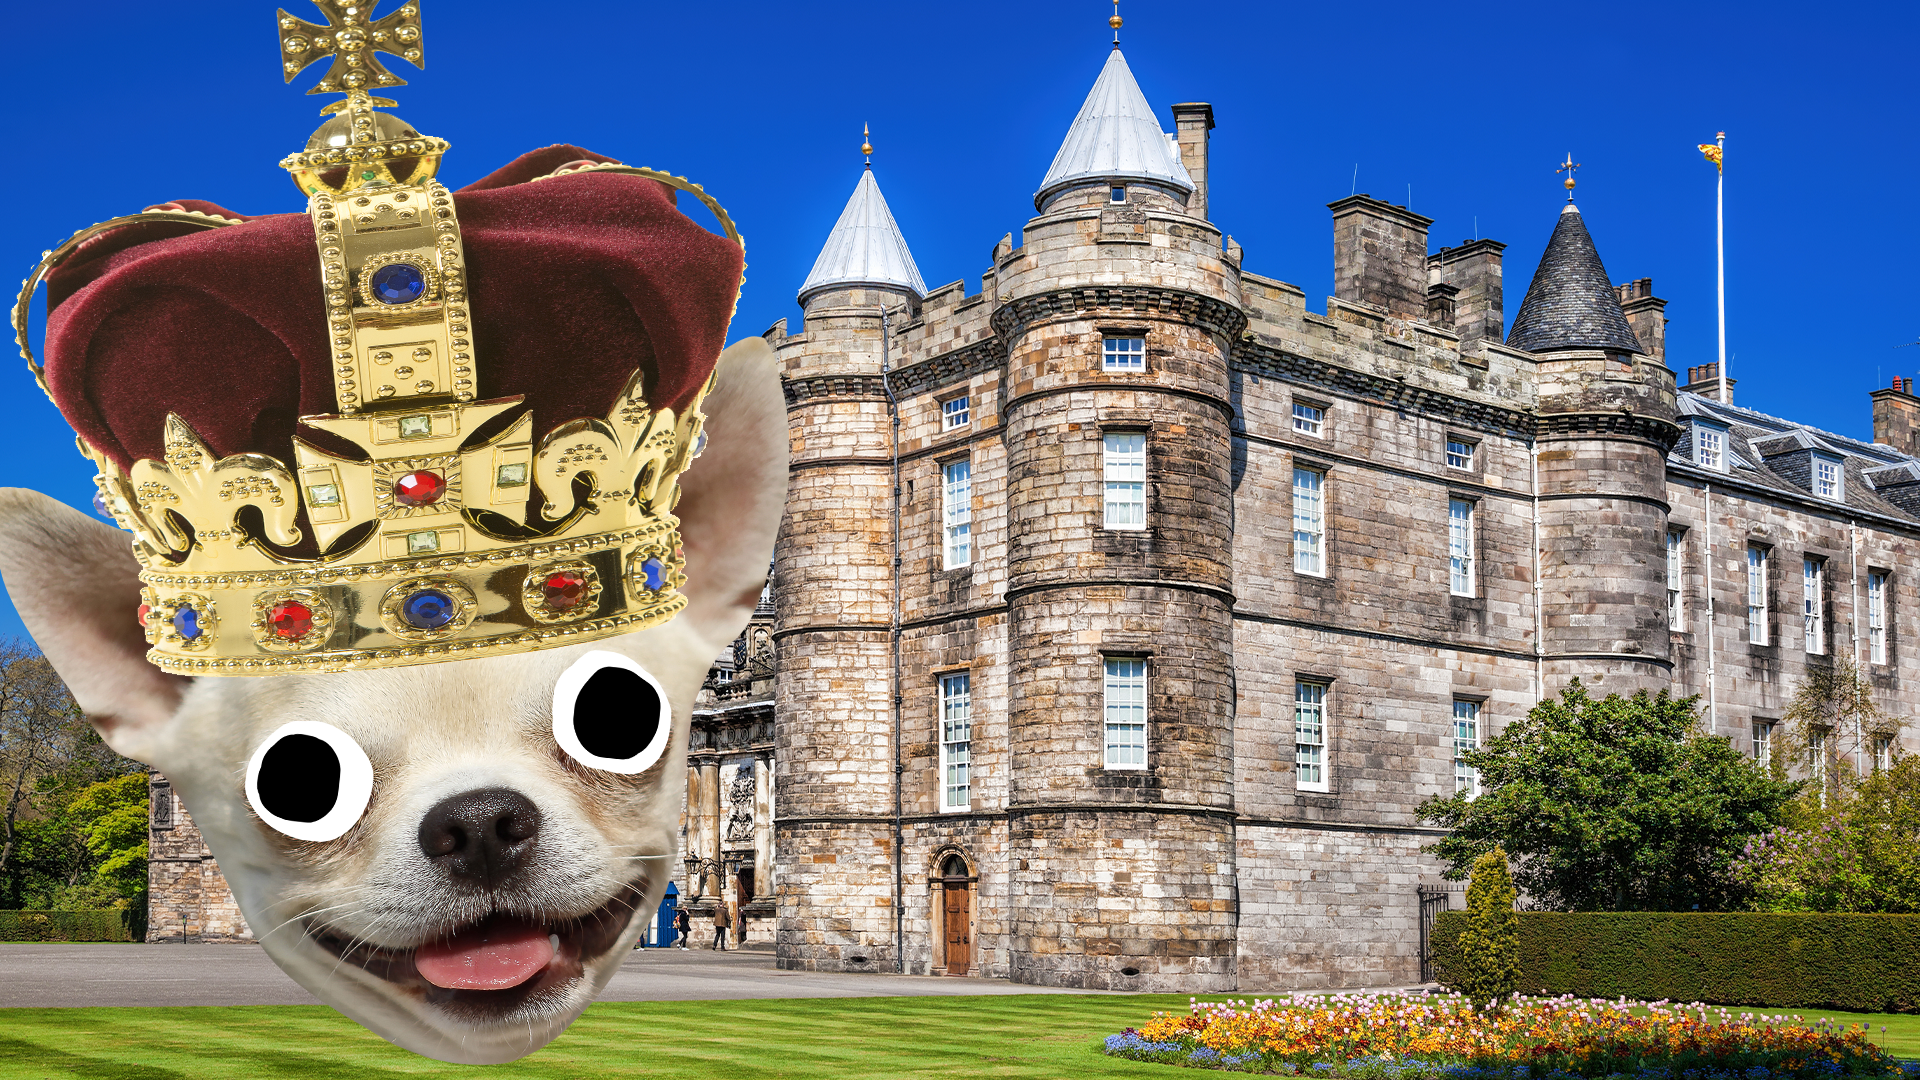 Hollyrood palace with derpy dog in crown